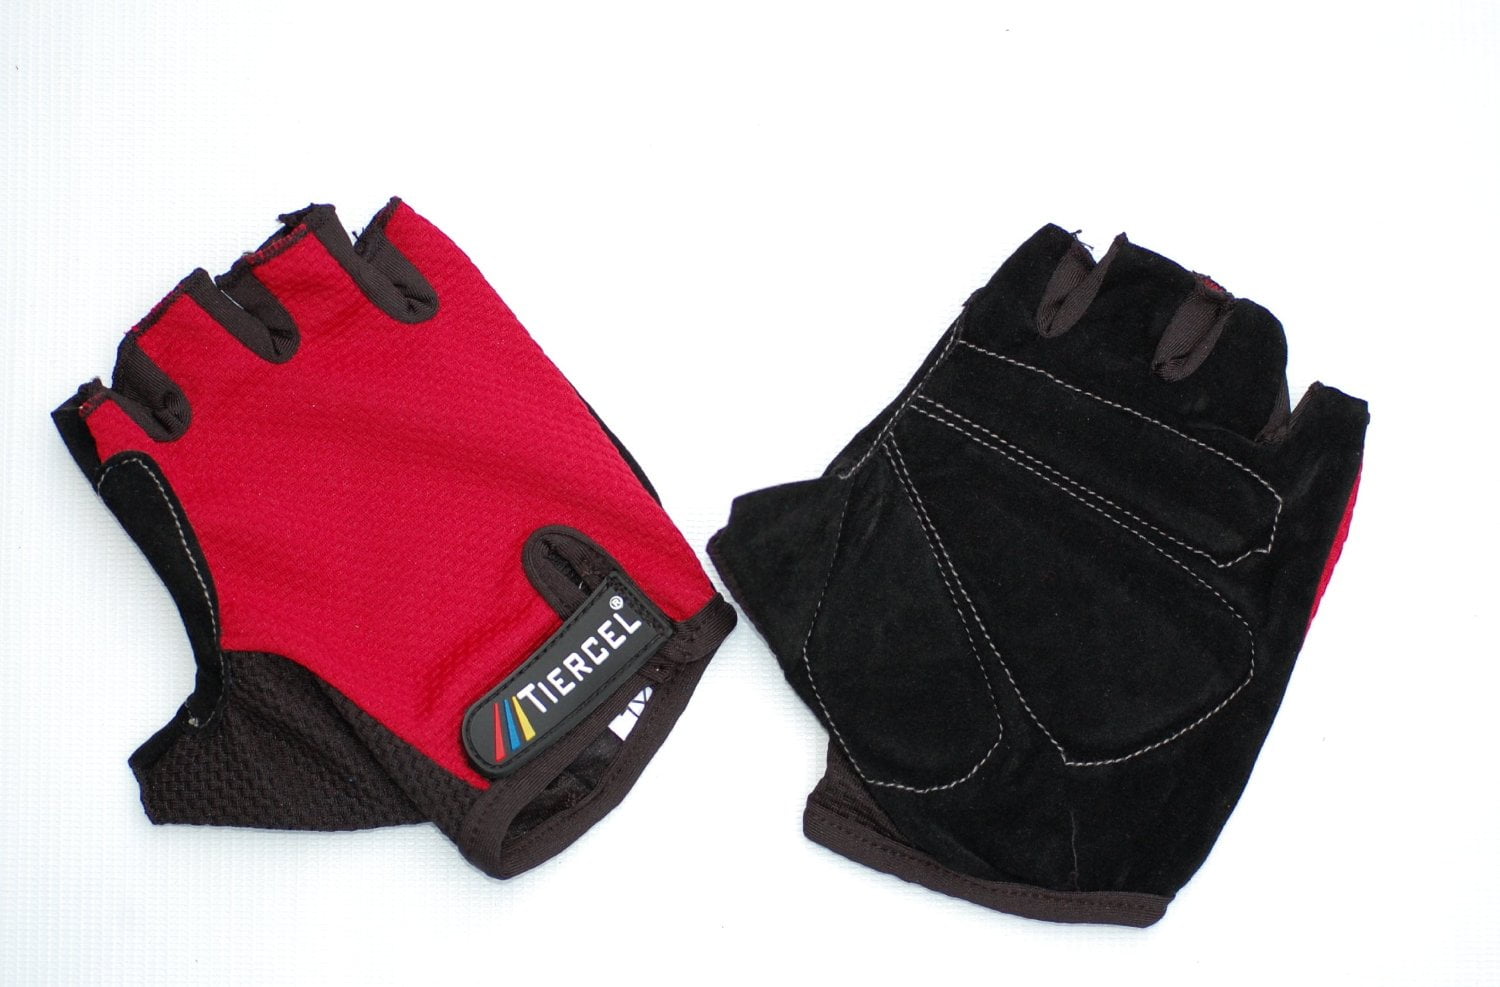 New Red Motorcycle Bicycle Bike Cycling Riding Half Finger Gloves Size M-XL 